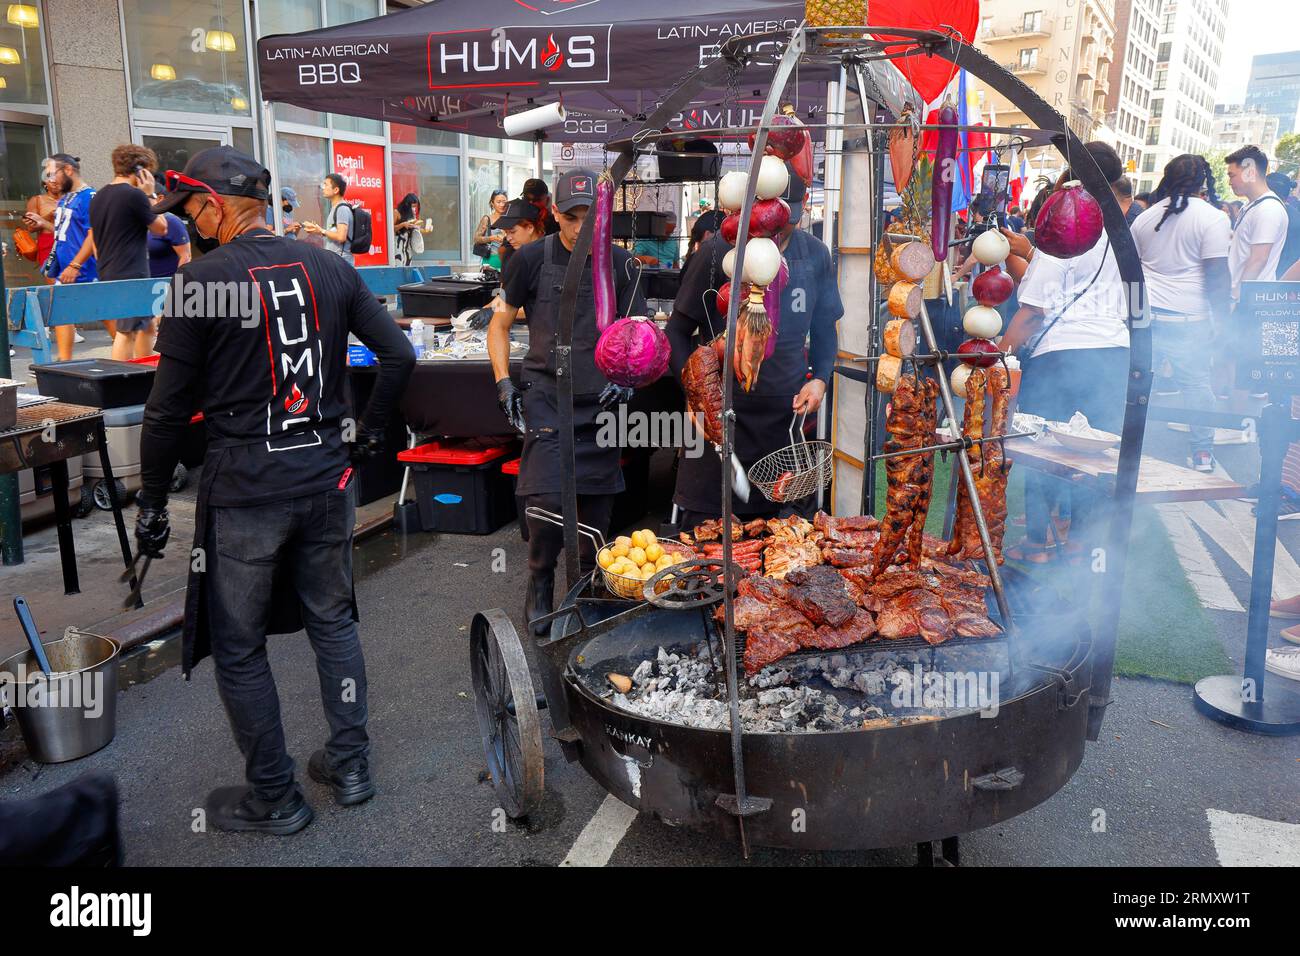 Humos Latin American BBQ workers tend to a Kankay open pit display grill at Philippines Fest food festival street fair on 4th Ave, 27 August 2023. Stock Photo